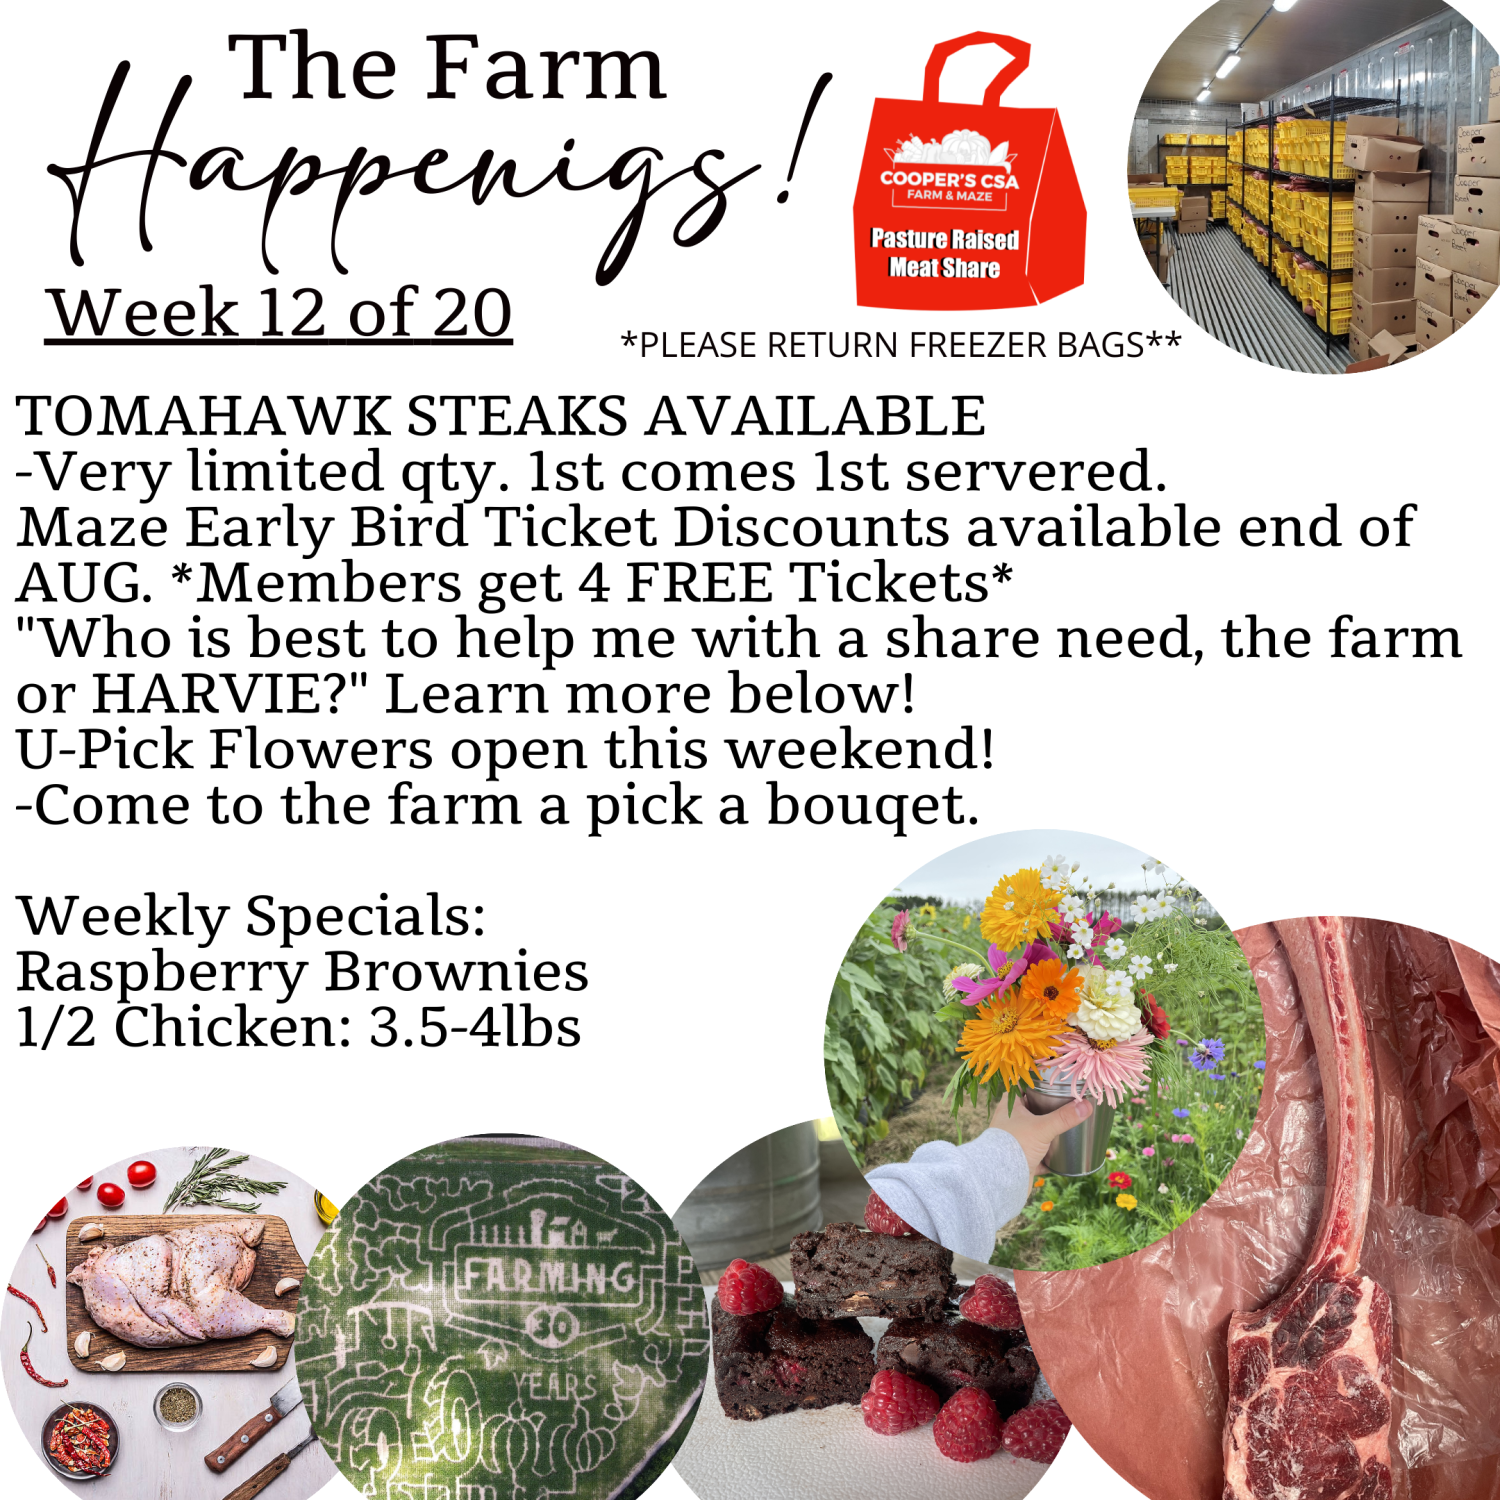 Previous Happening: "Pasture Meat Shares"-Coopers CSA Farm Farm Happenings Week 12